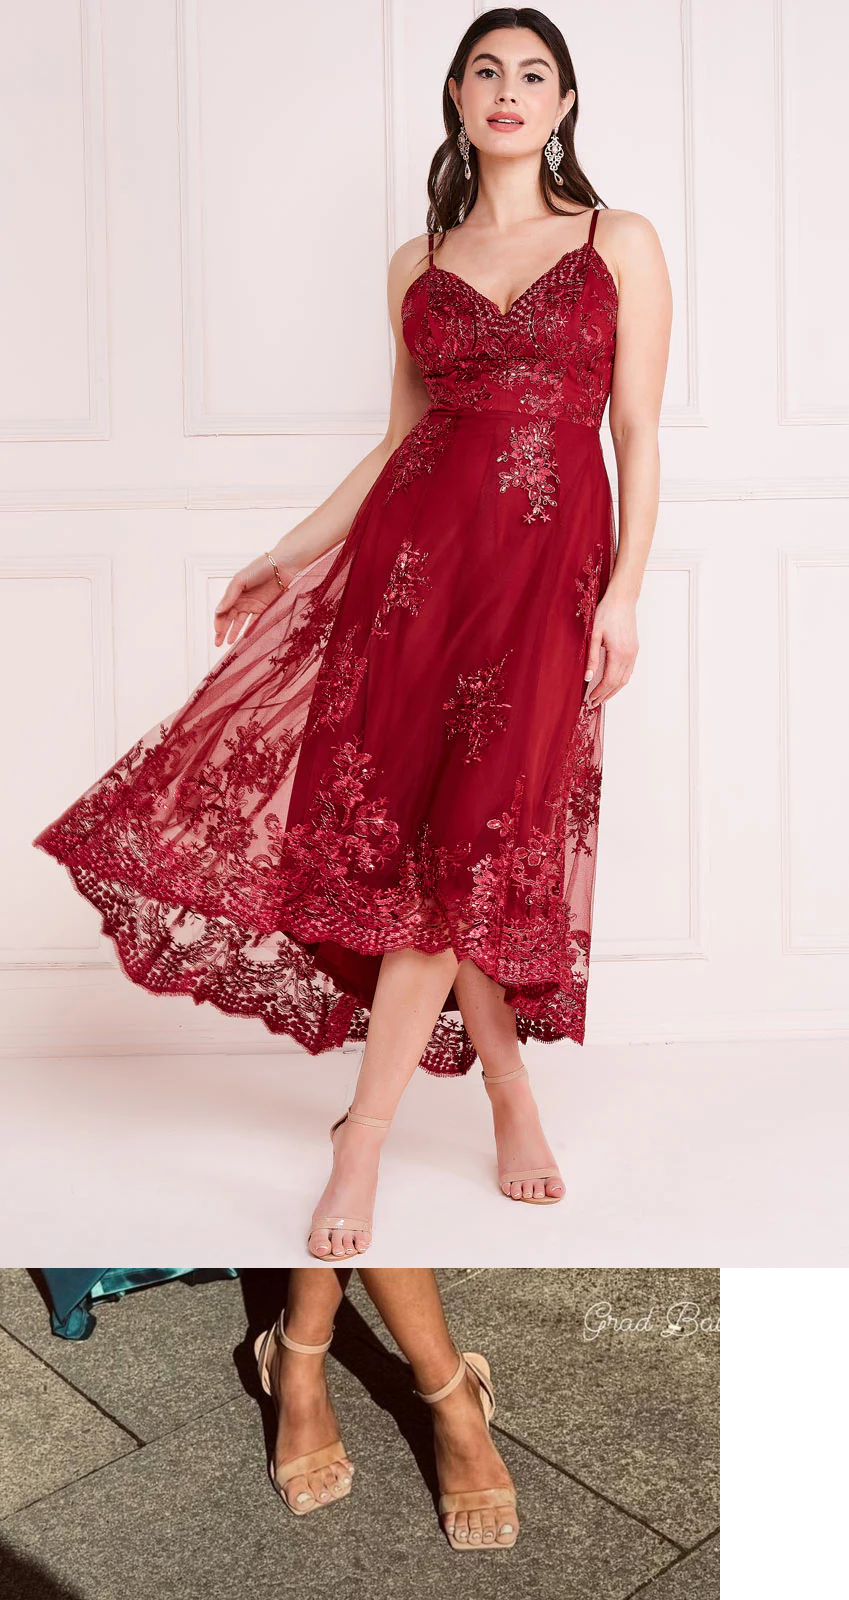 High Low Dress (Burgundy) Mother of Bride/Groom. Wedding Guest. Cocktail. Ball. Cruise